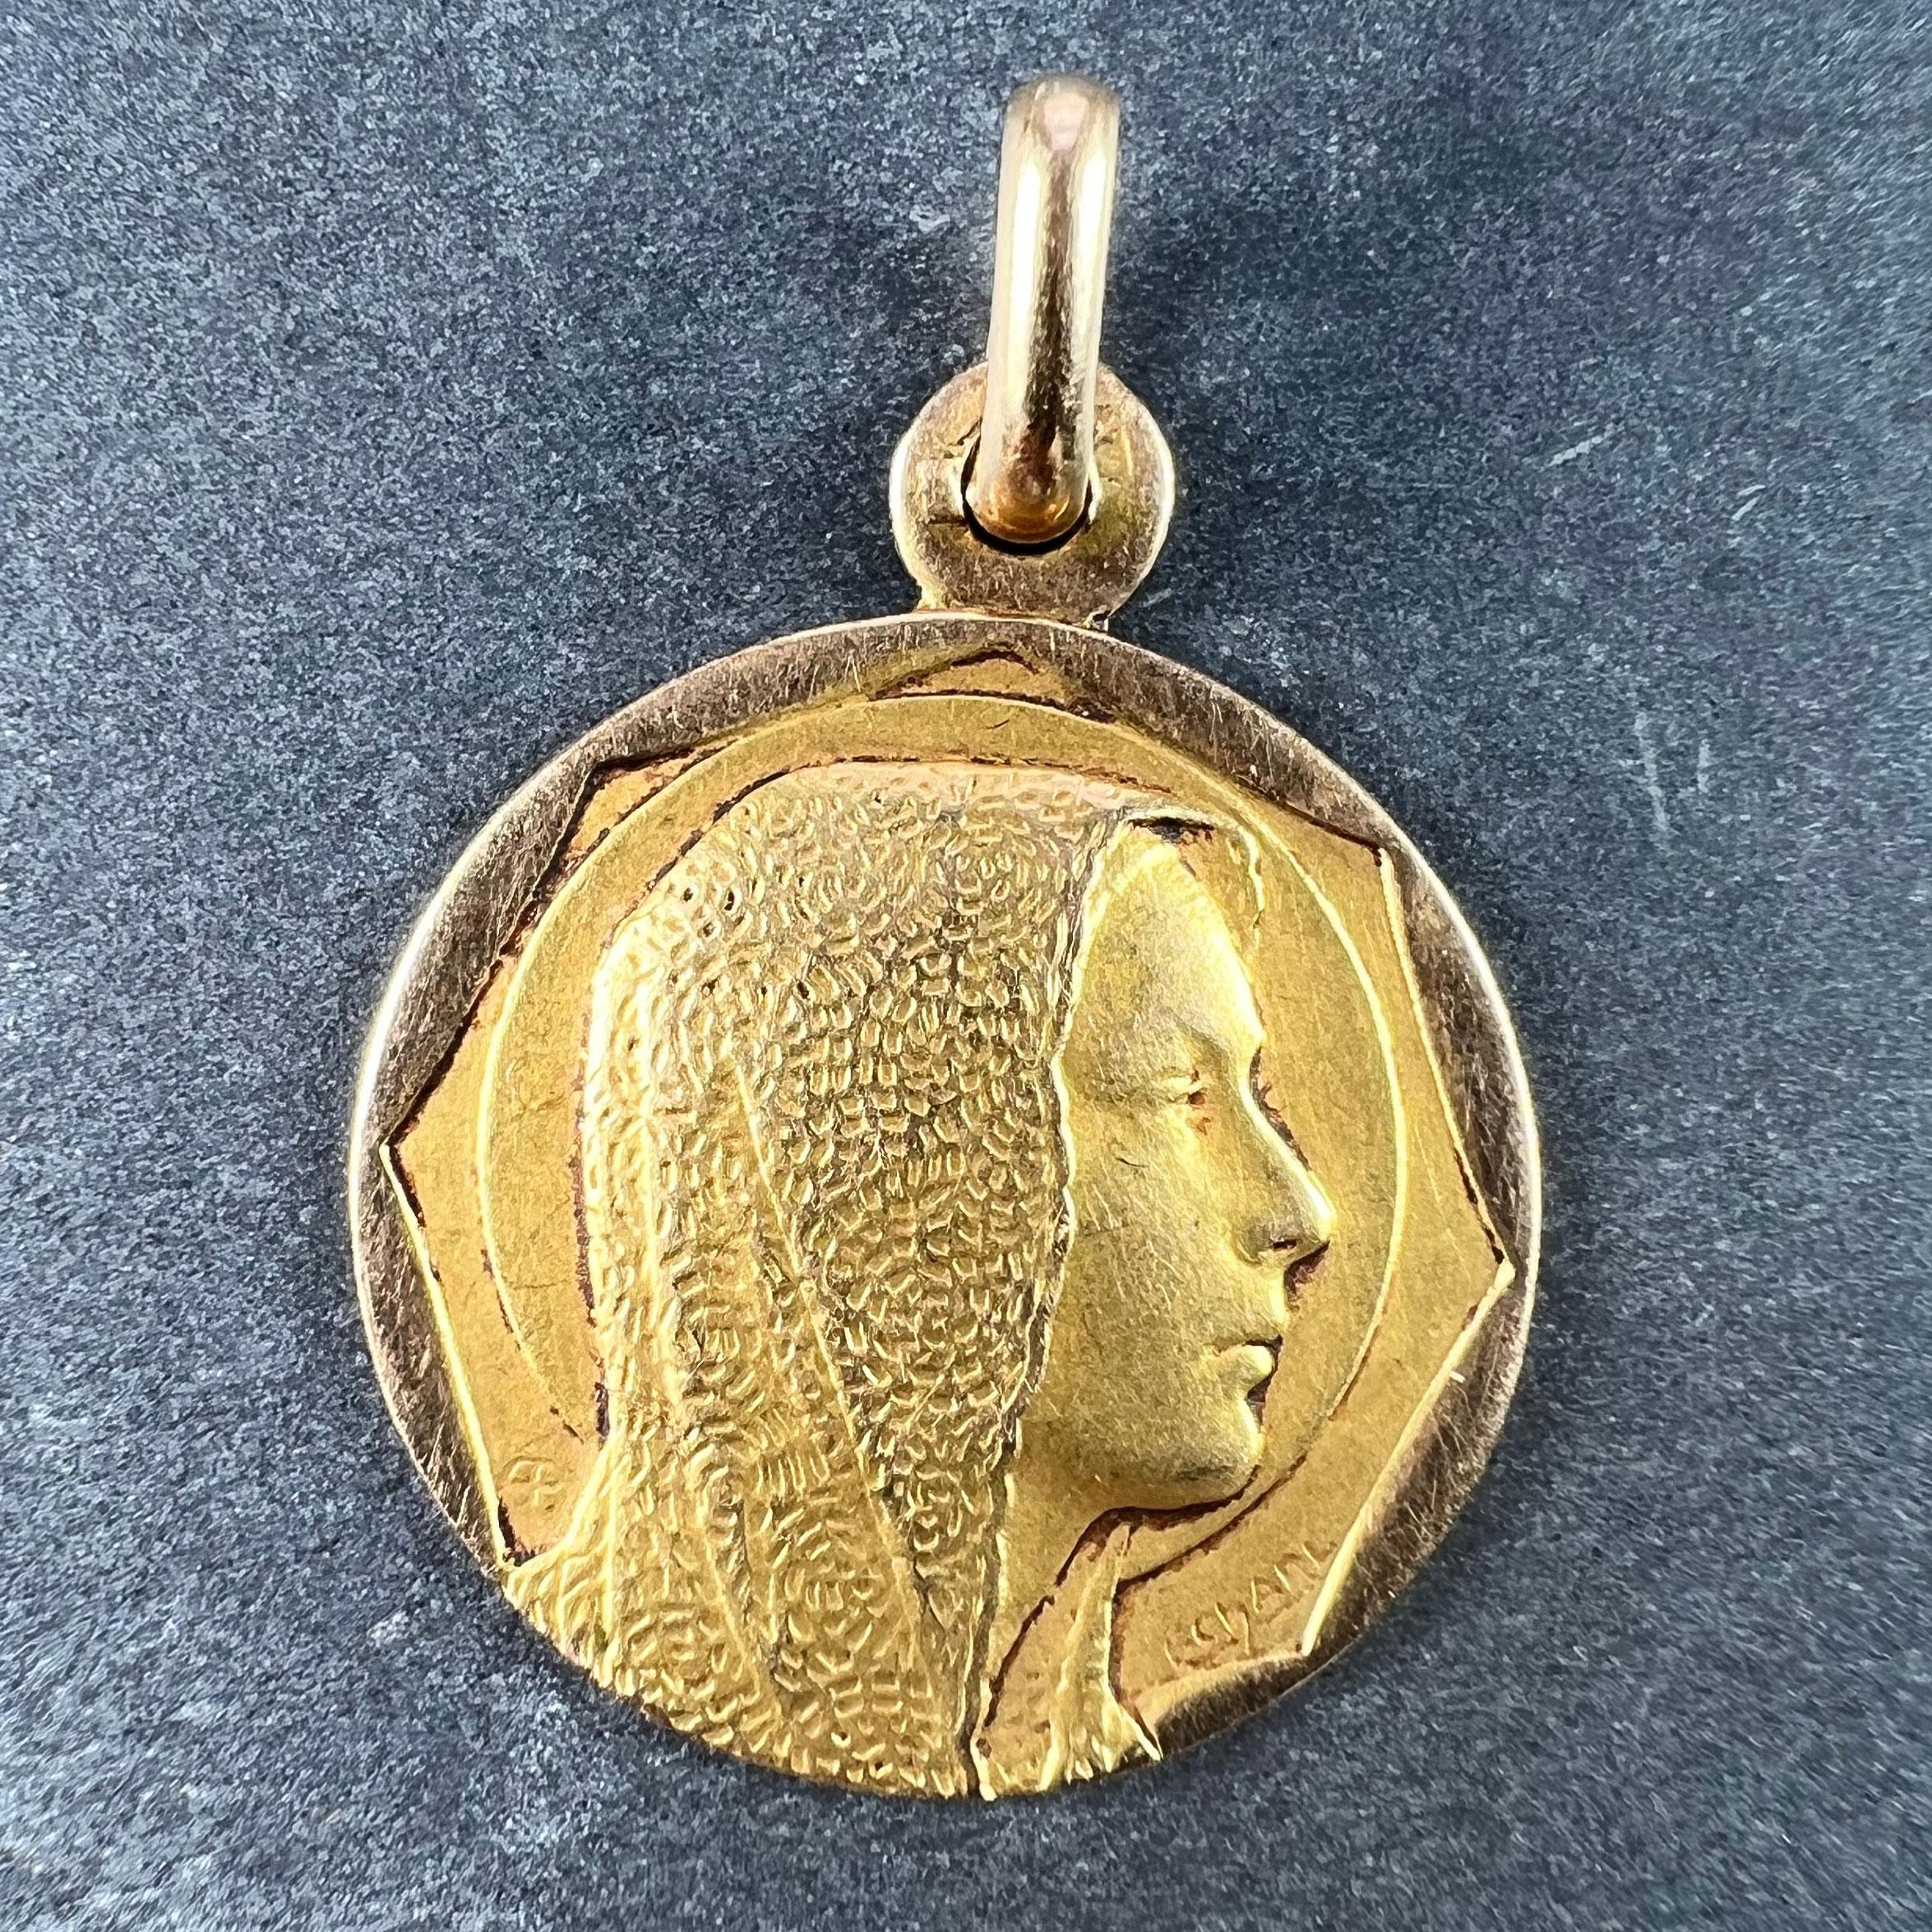 An 18 karat (18K) yellow gold religious charm pendant designed as a medal depicting the Virgin Mary, wearing a finely detailed lace veil within an octagonal frame. Signed C. Charl, stamped with the eagle's head mark for 18 karat gold and French